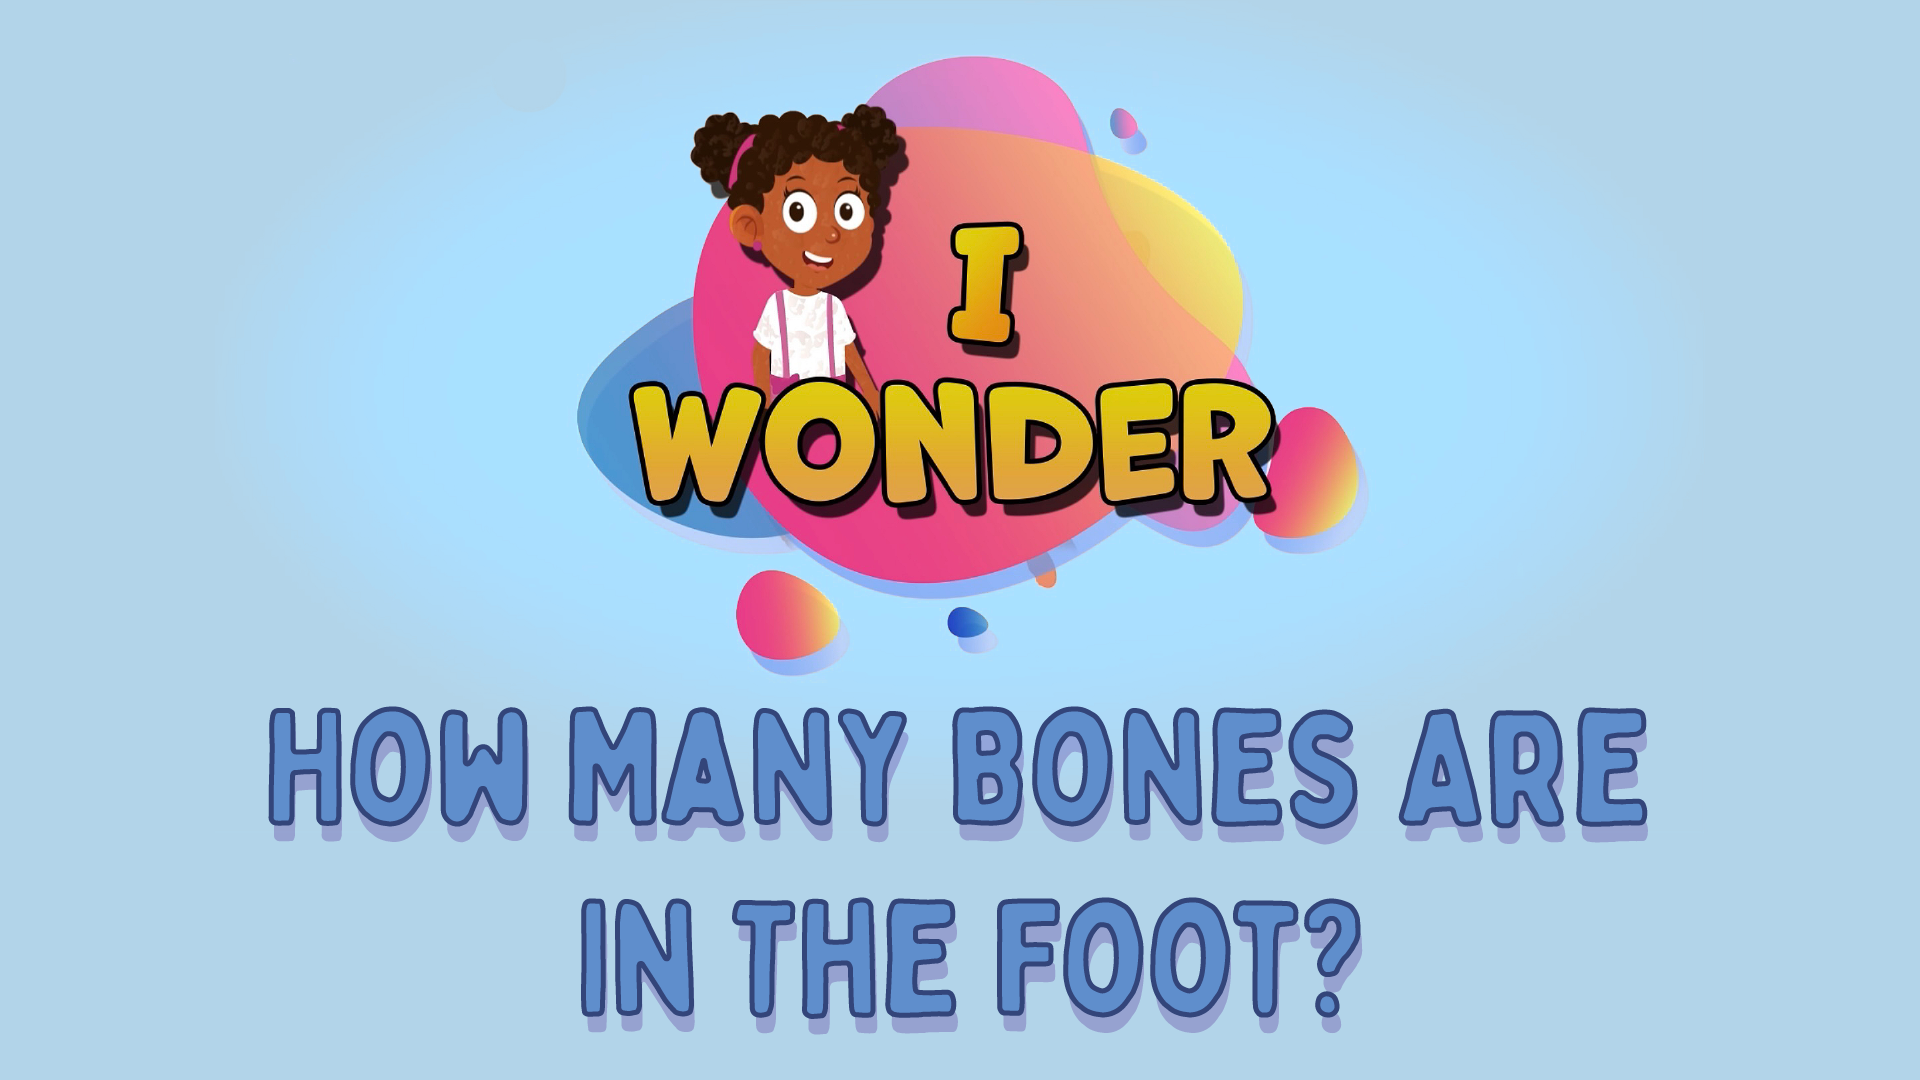 How Many Bones Are In The Foot?